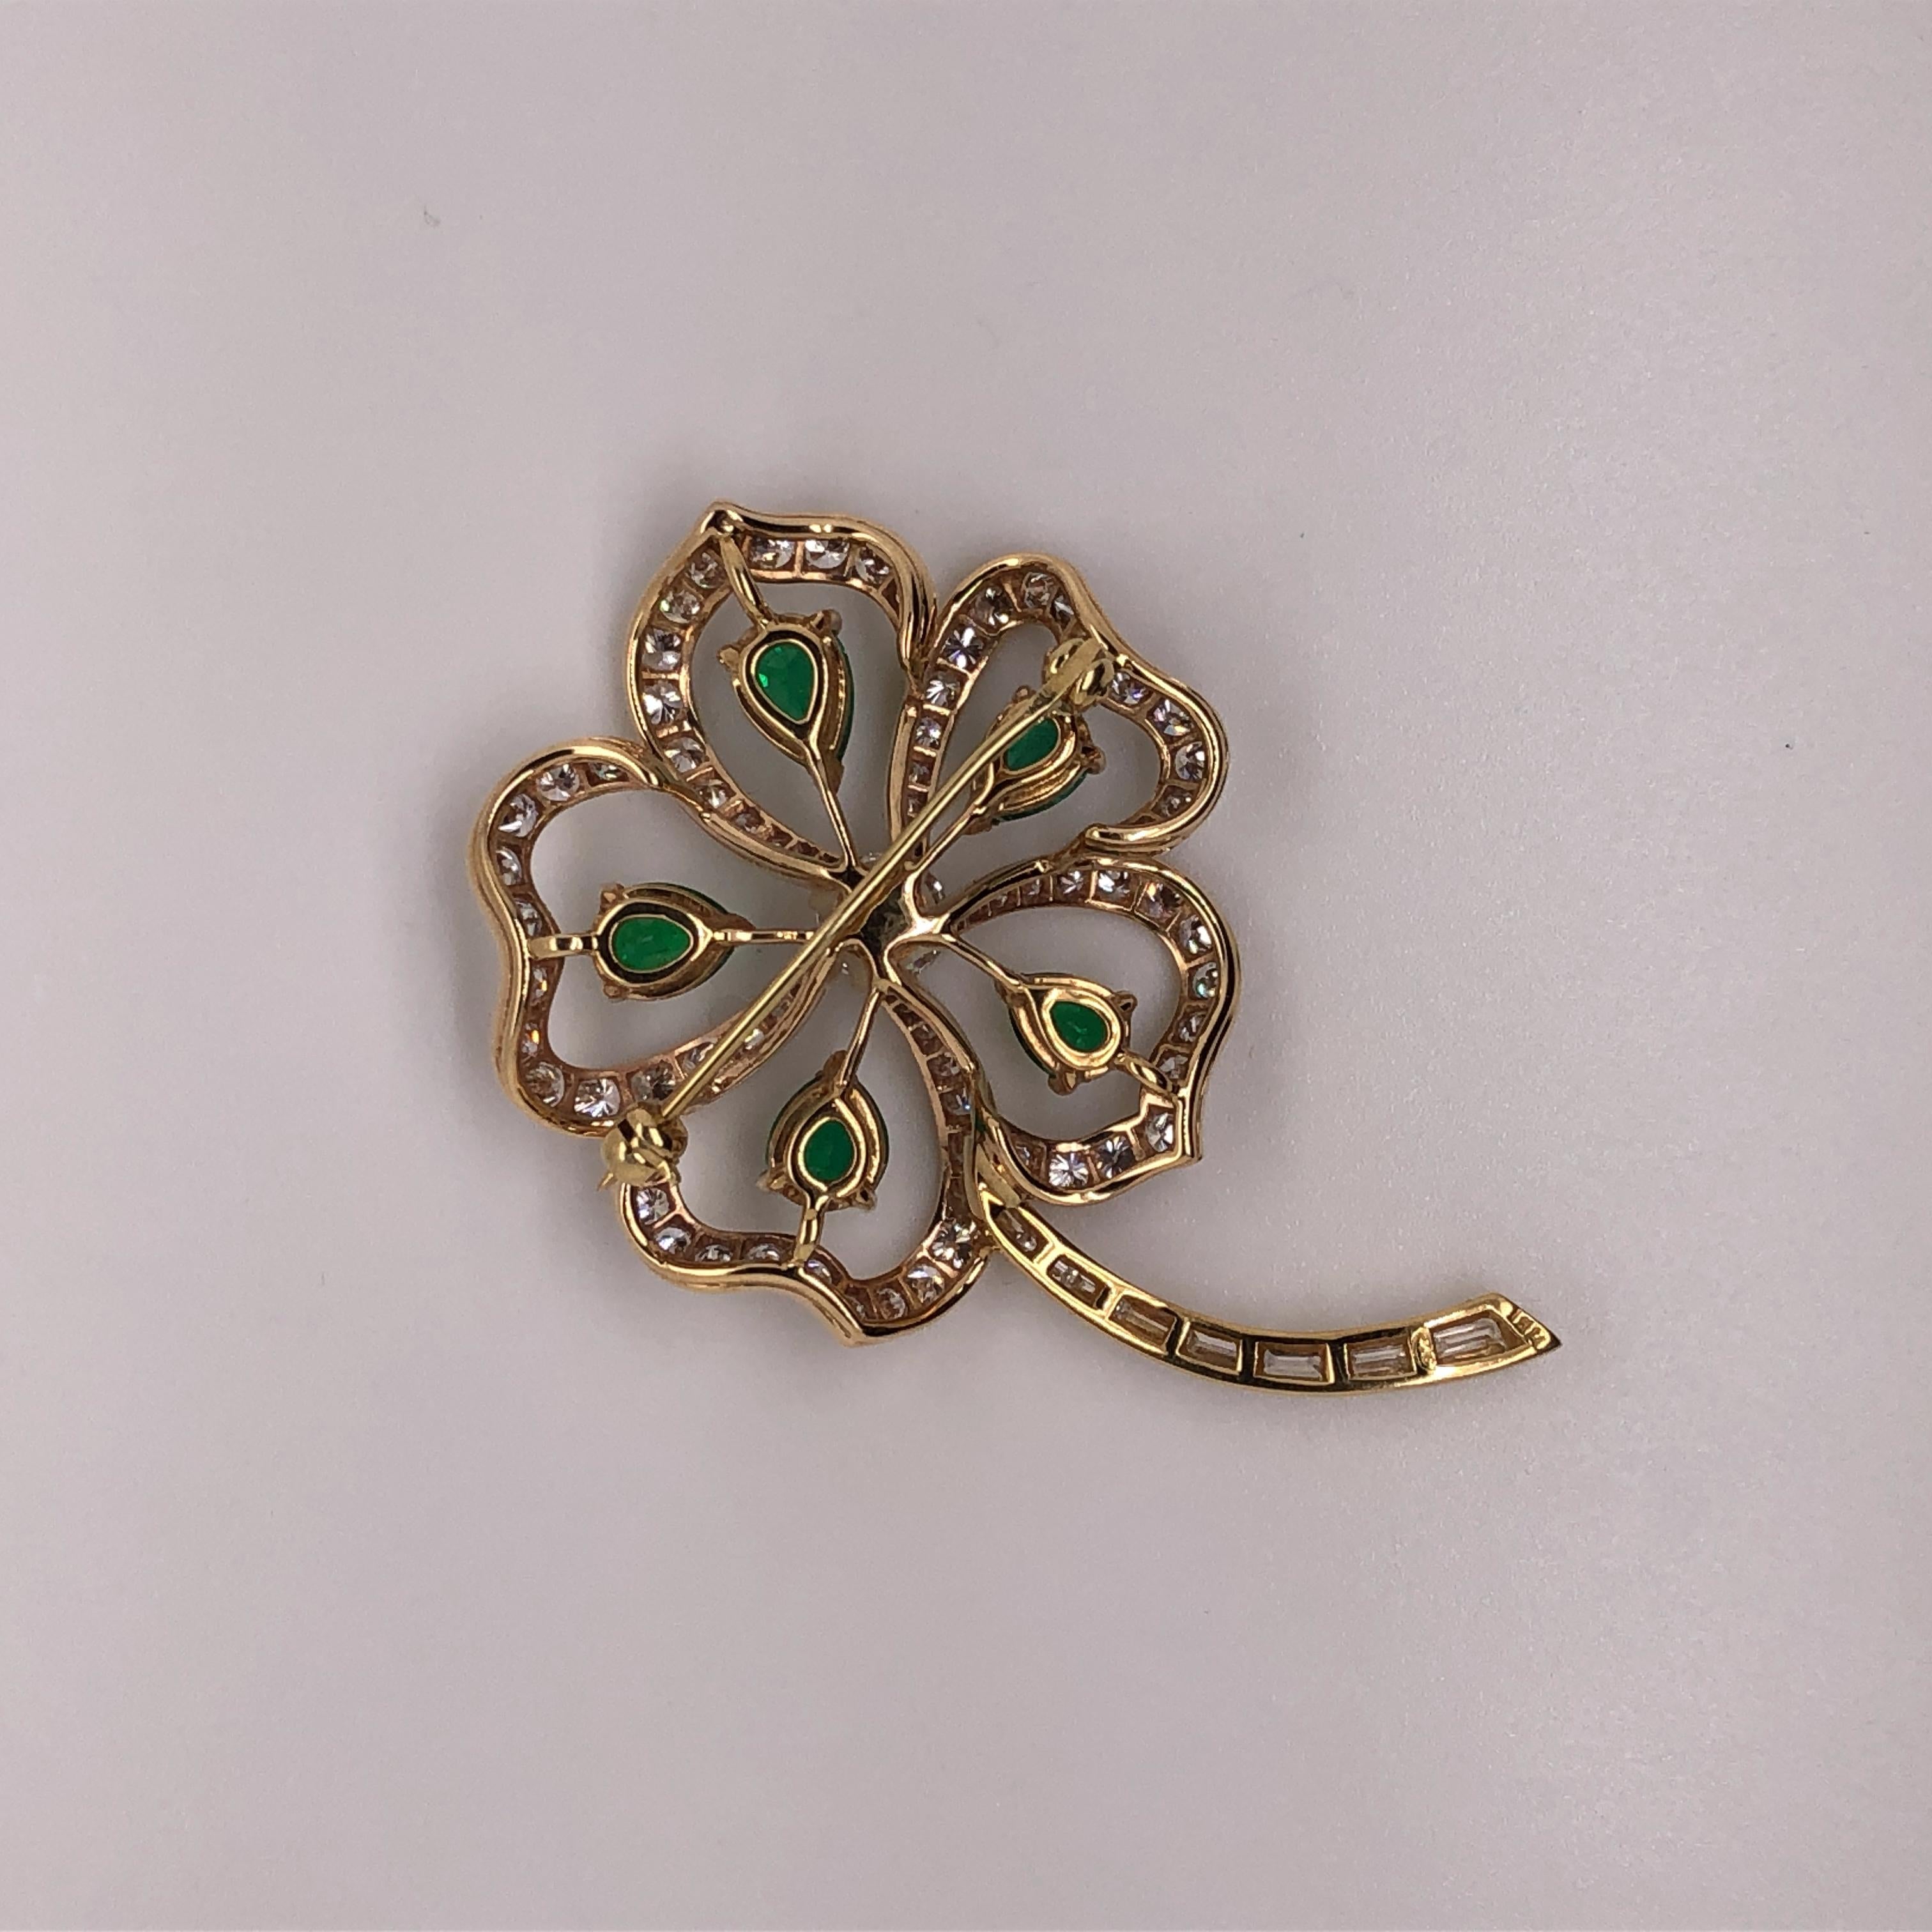 14kt yellow gold 4-Leaf Clover Pin. This pin contains 3.90 carats of H-I color, SI1-SI2 clarity diamonds and 2.36 carats of emeralds. The diamonds in this pin are graded higher than the standard color and clarity for most engagement rings in the